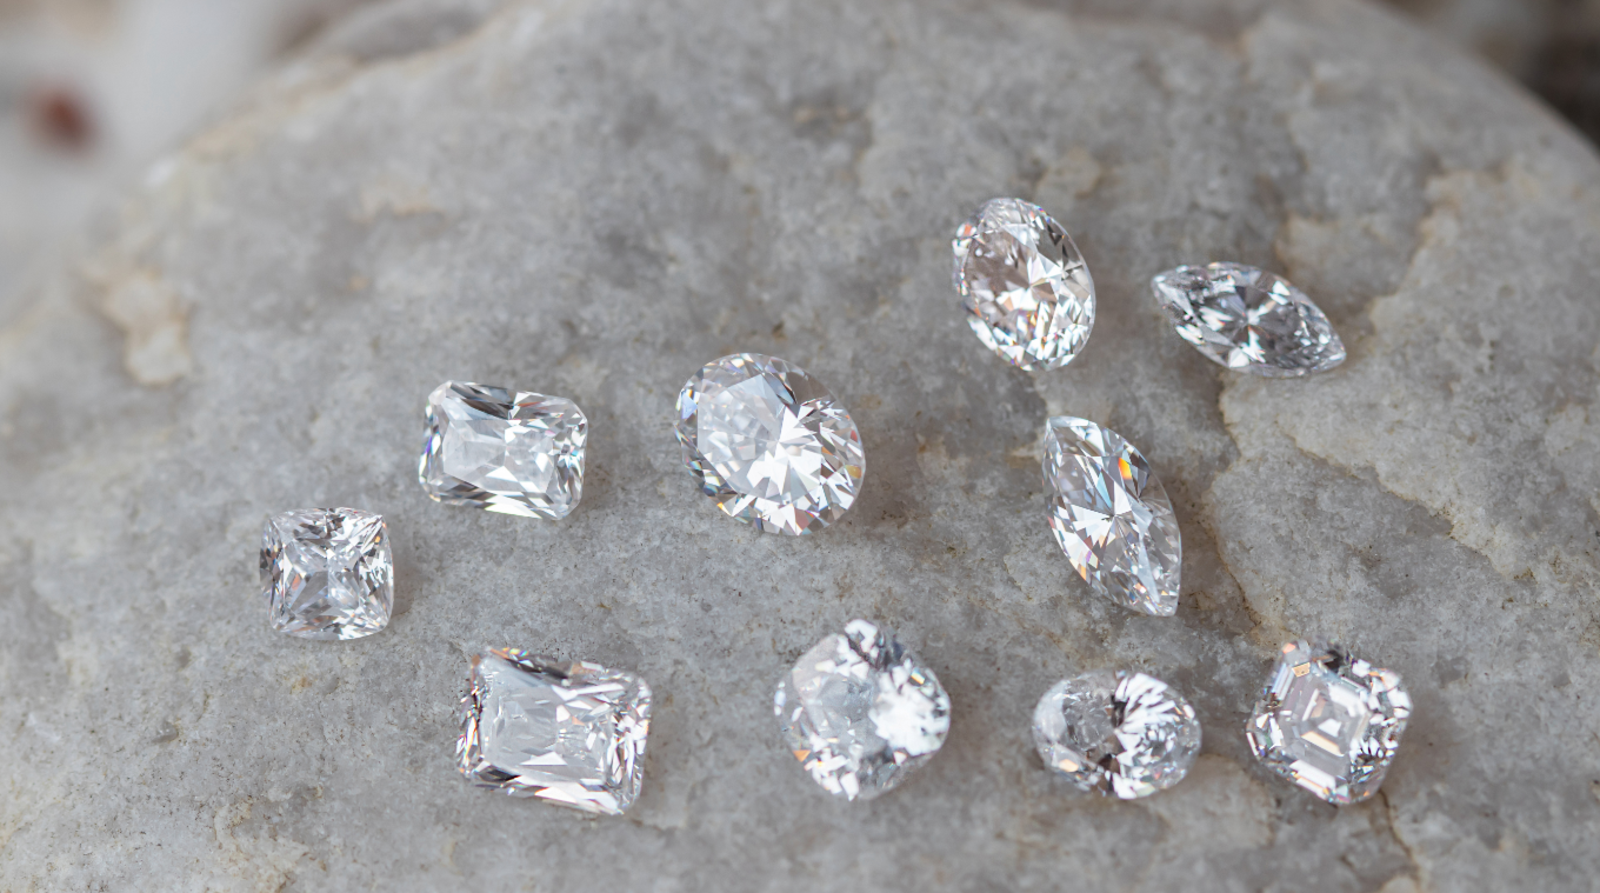 Lab-Grown Diamond Market Is In Store For A New Boost